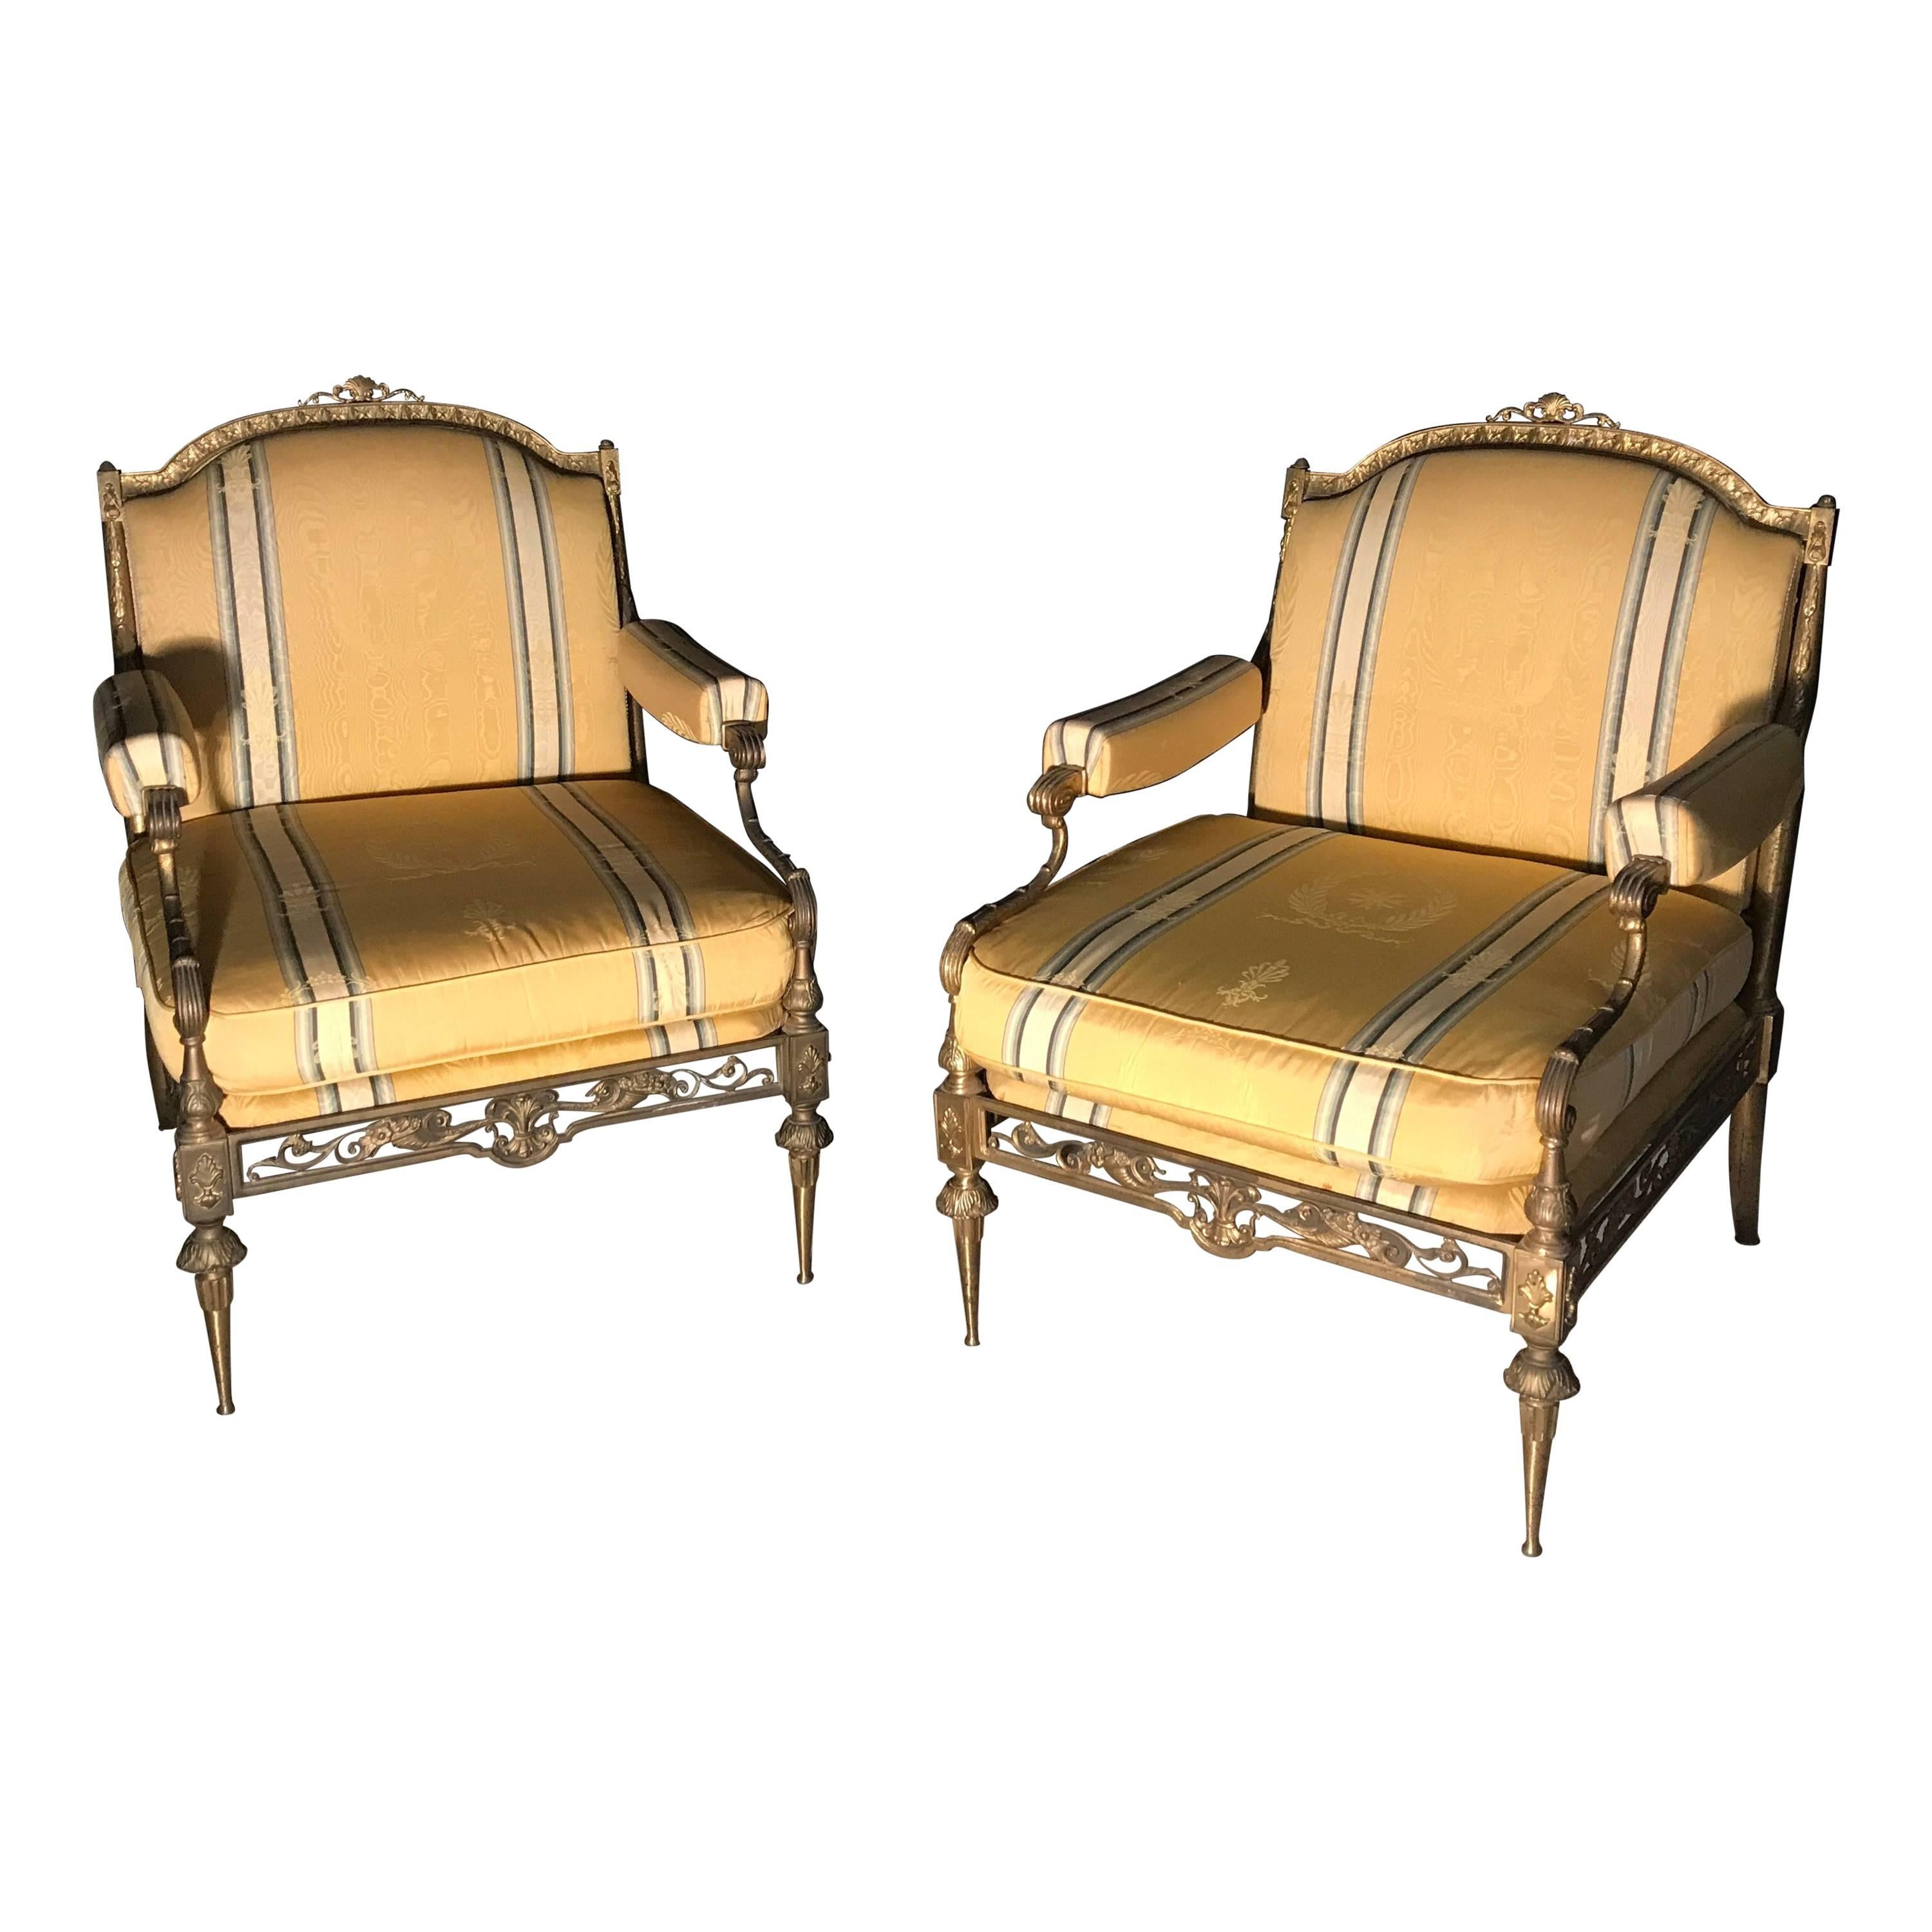 Exceptional Pair of Gilt-Bronze Armchairs